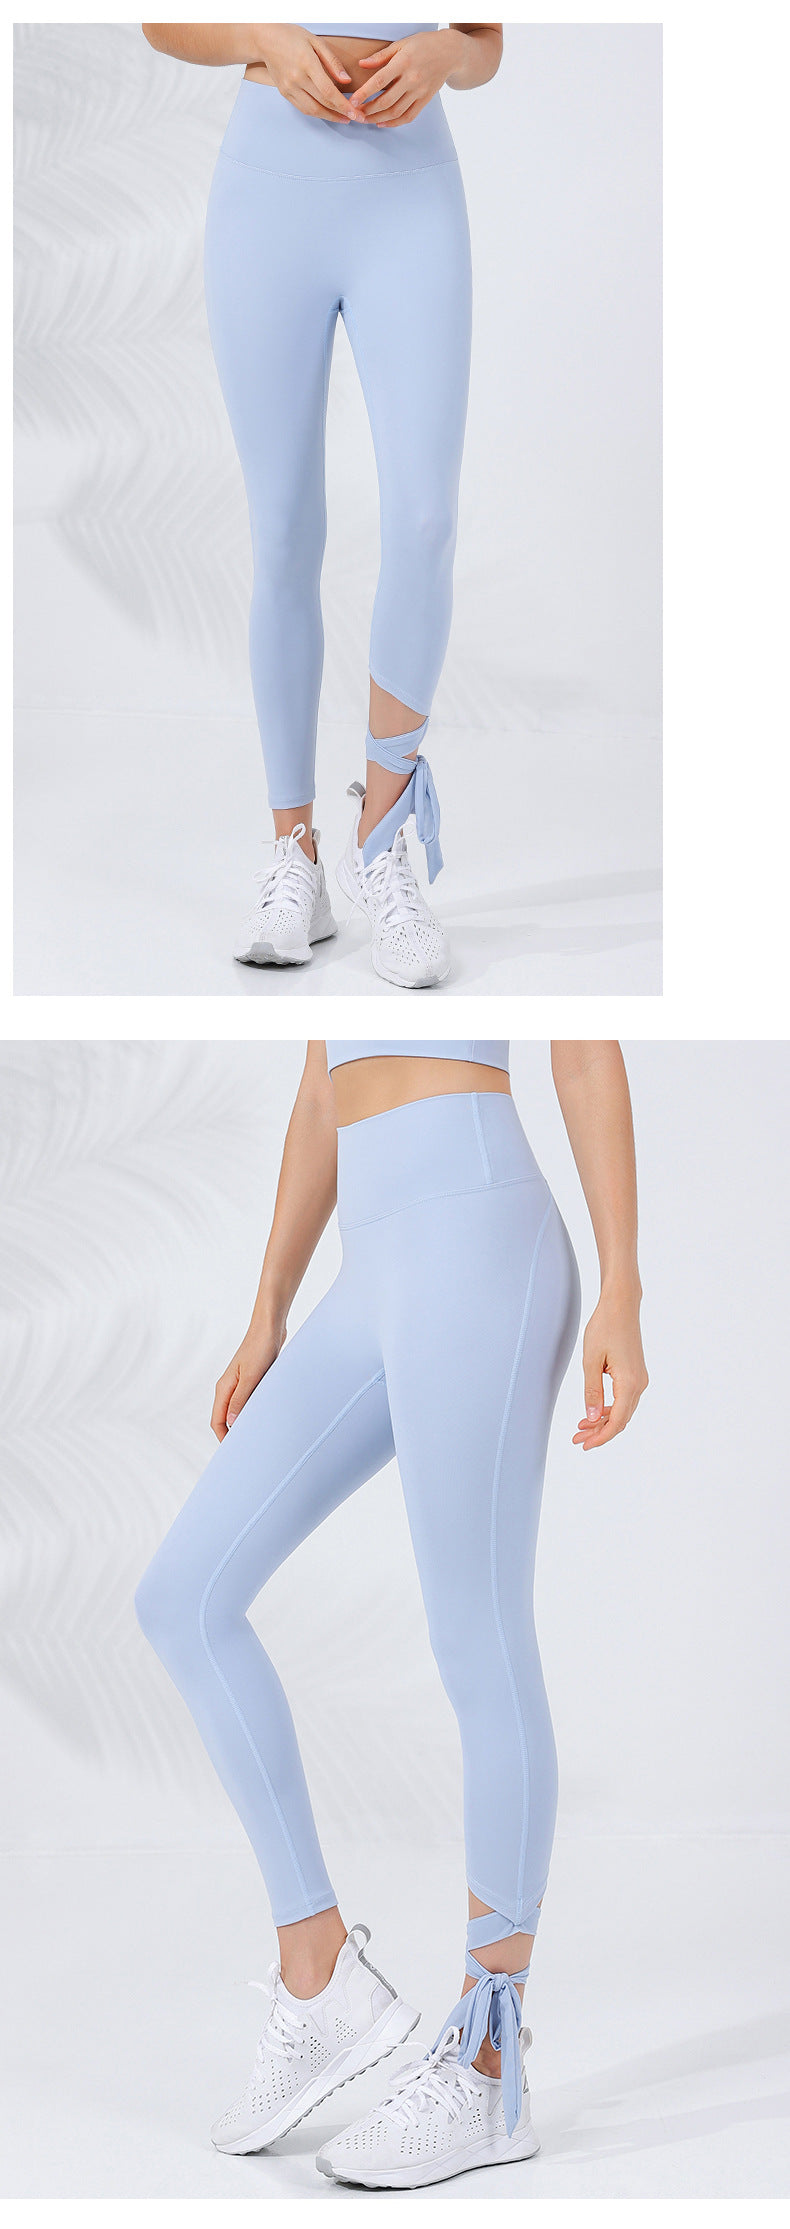 2023.09 New innovative calf straps, new style sports pants for women, high waist, tummy control, butt lift, zero embarrassment zone fitness yoga pants